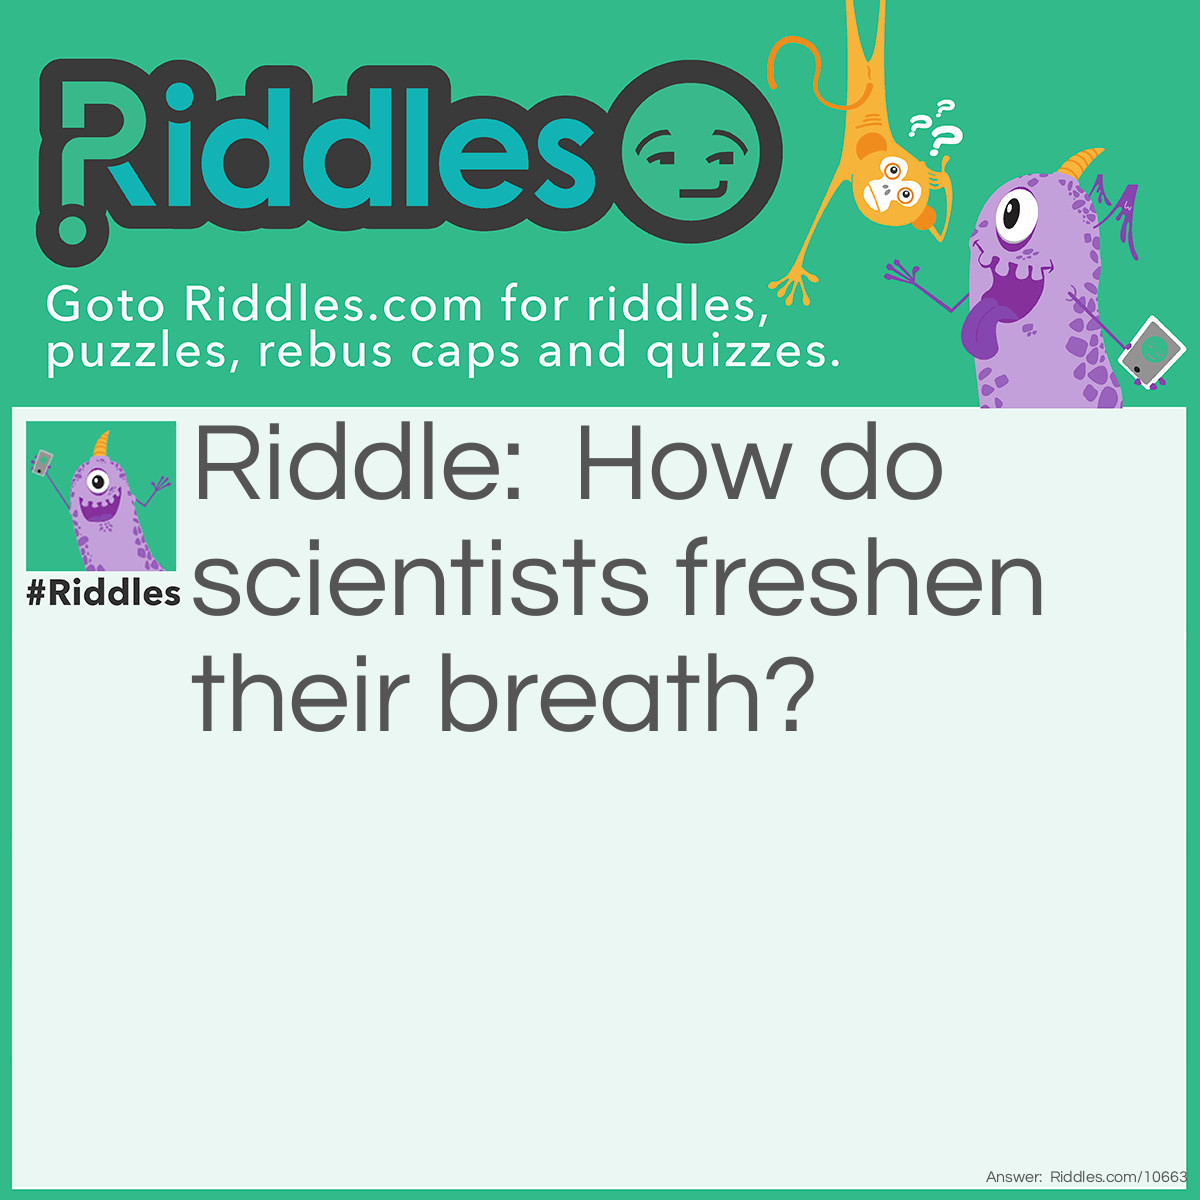 Riddle: How do scientists freshen their breath? Answer: With experi-mints.